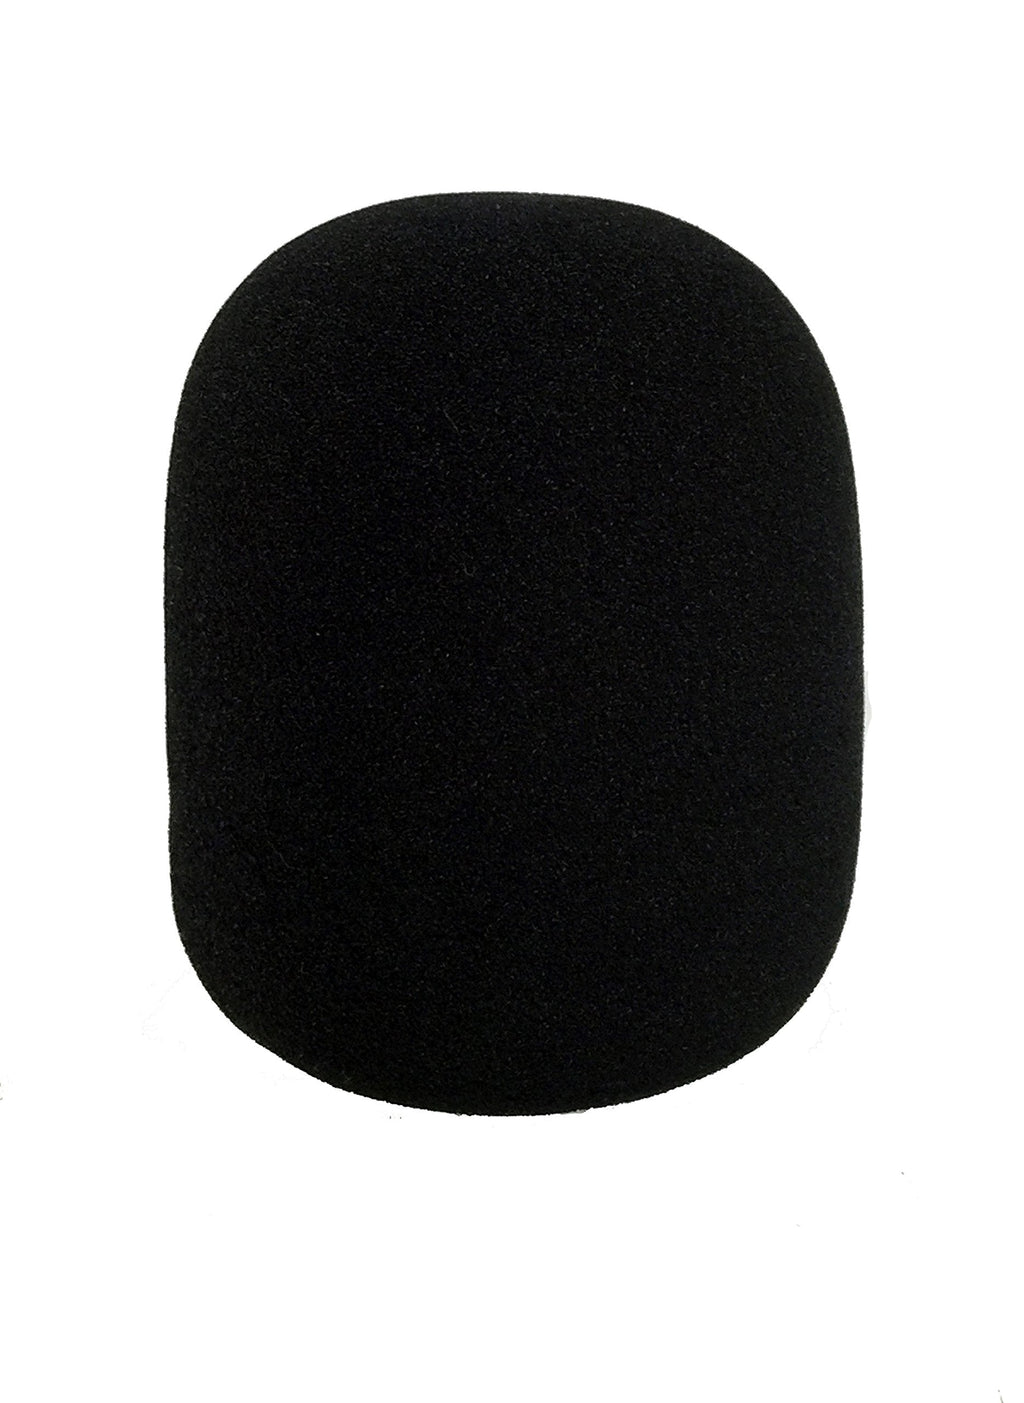 Tetra-Teknica Essentials Series XLWS-1P Extra Large Microphone Windscreen for Blue Yeti, MXL, Audio Technica, and Other Large USB Microphones, Color Black